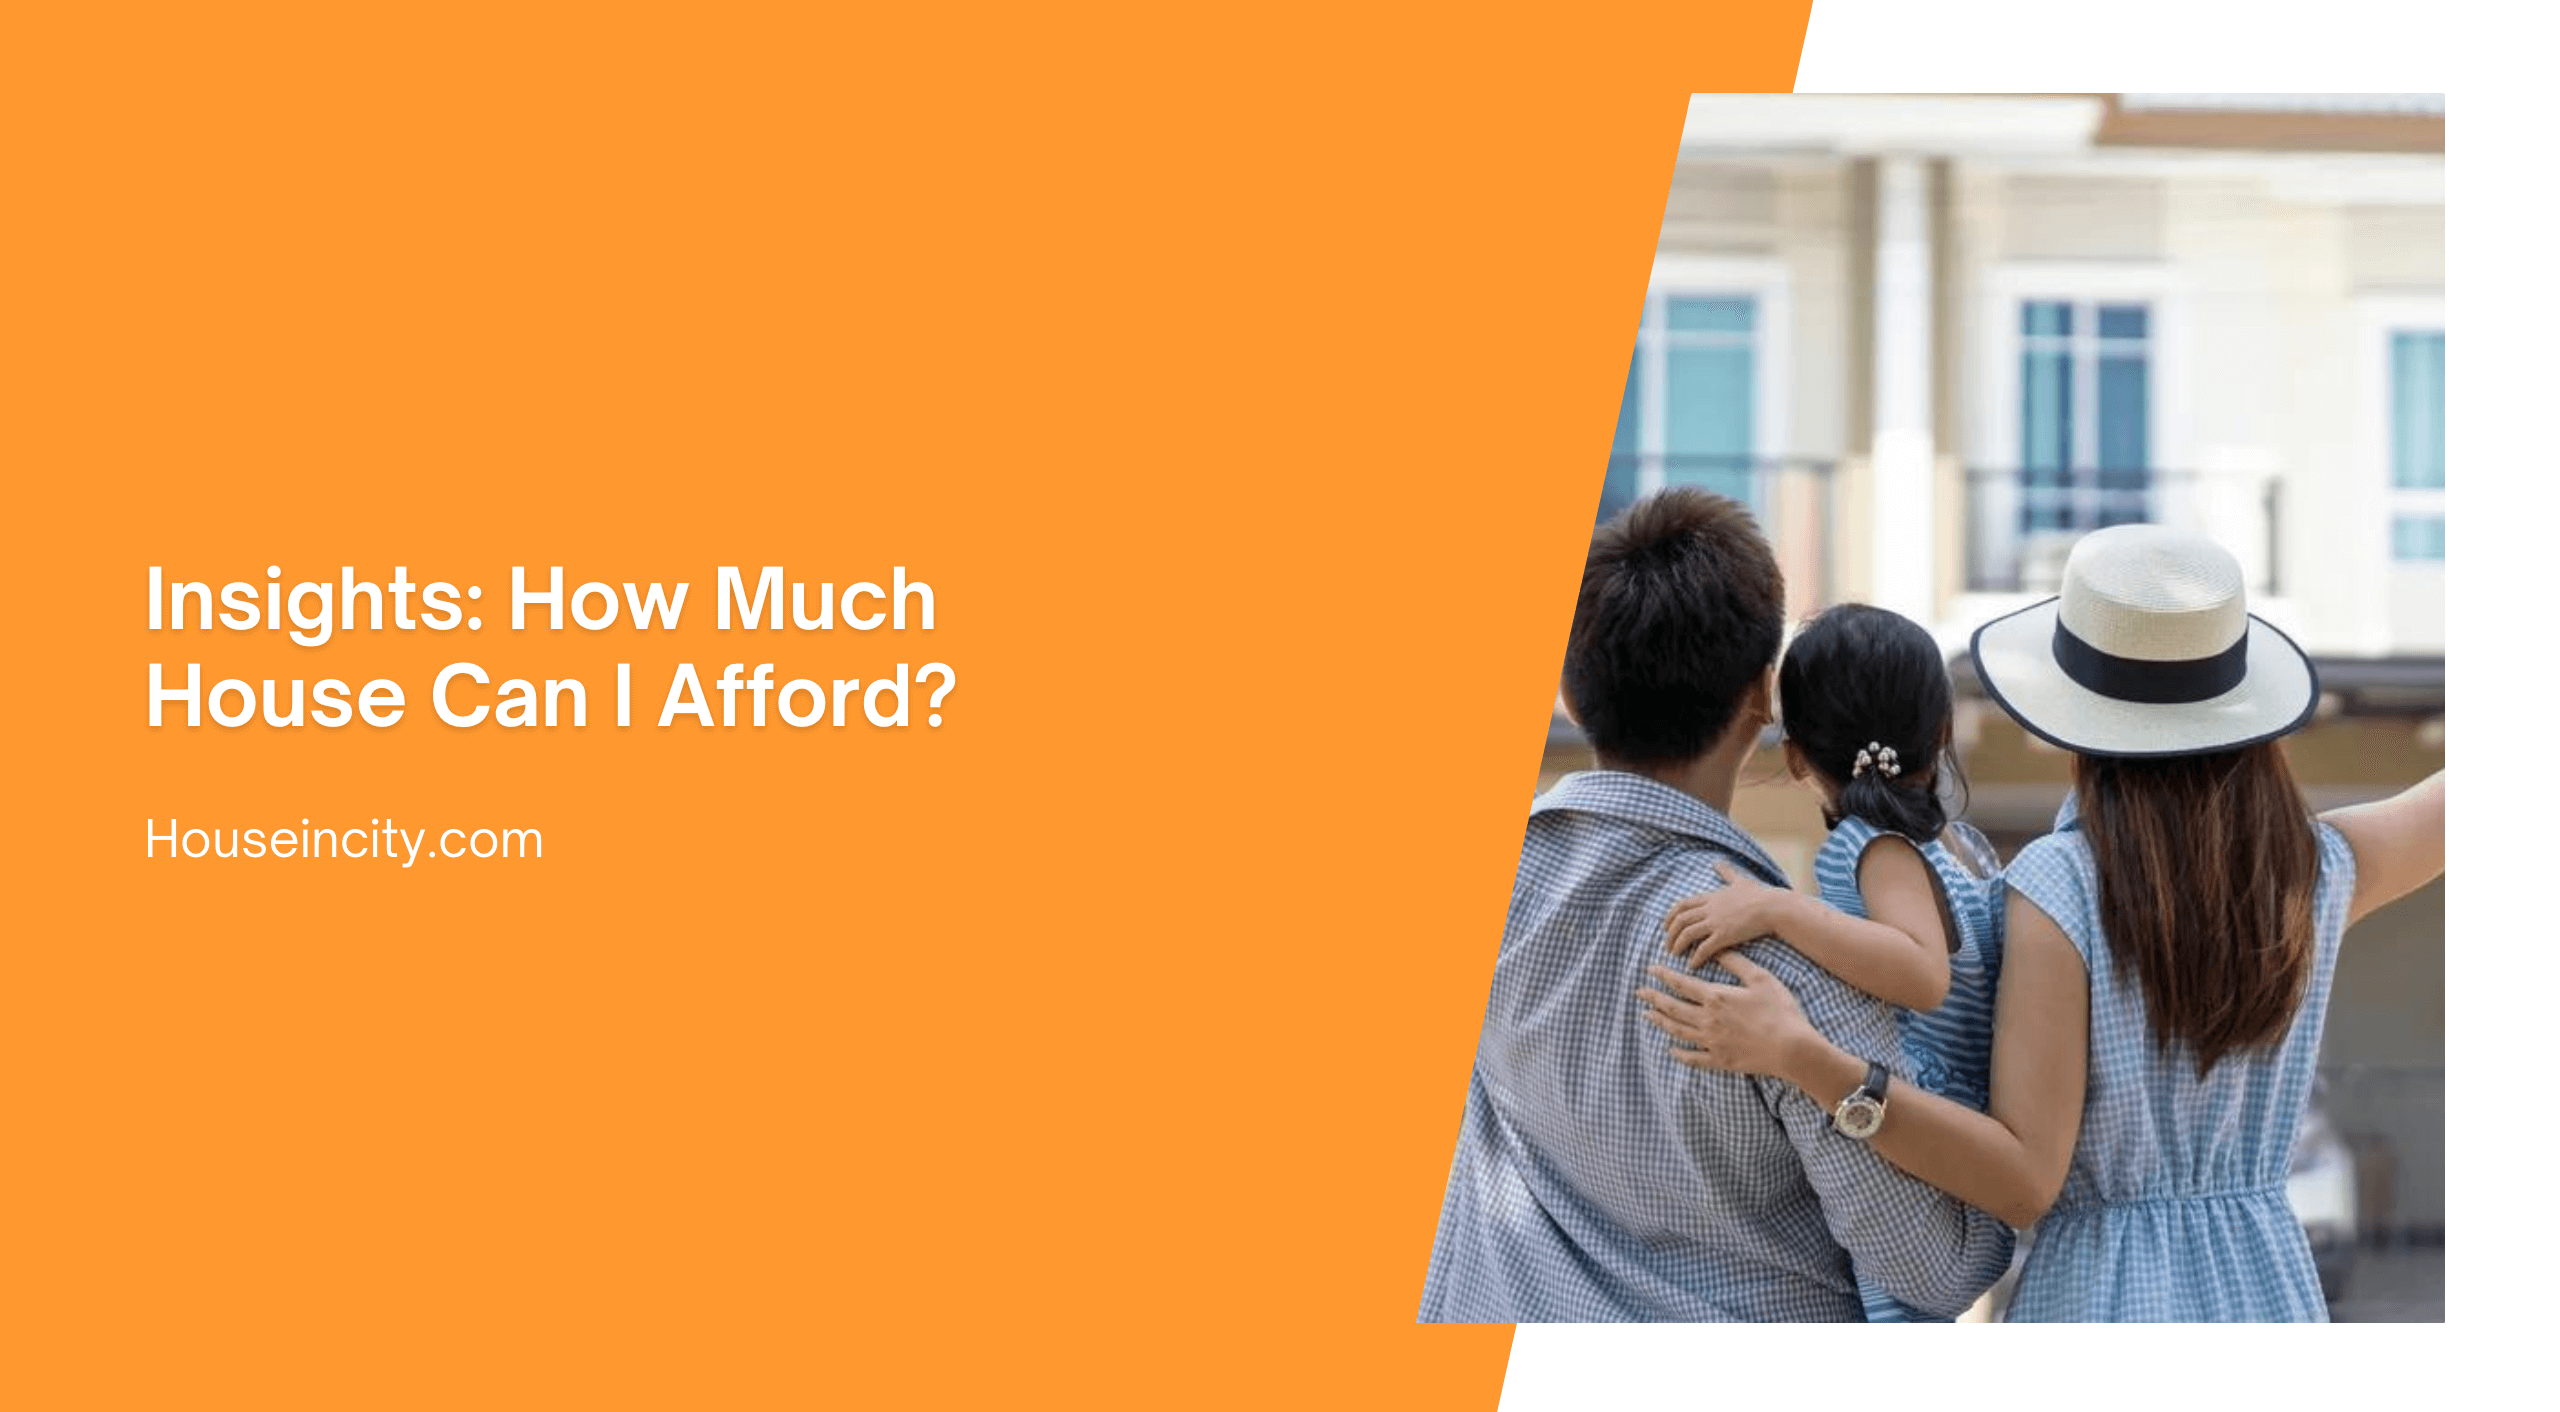 Insights: How Much House Can I Afford?